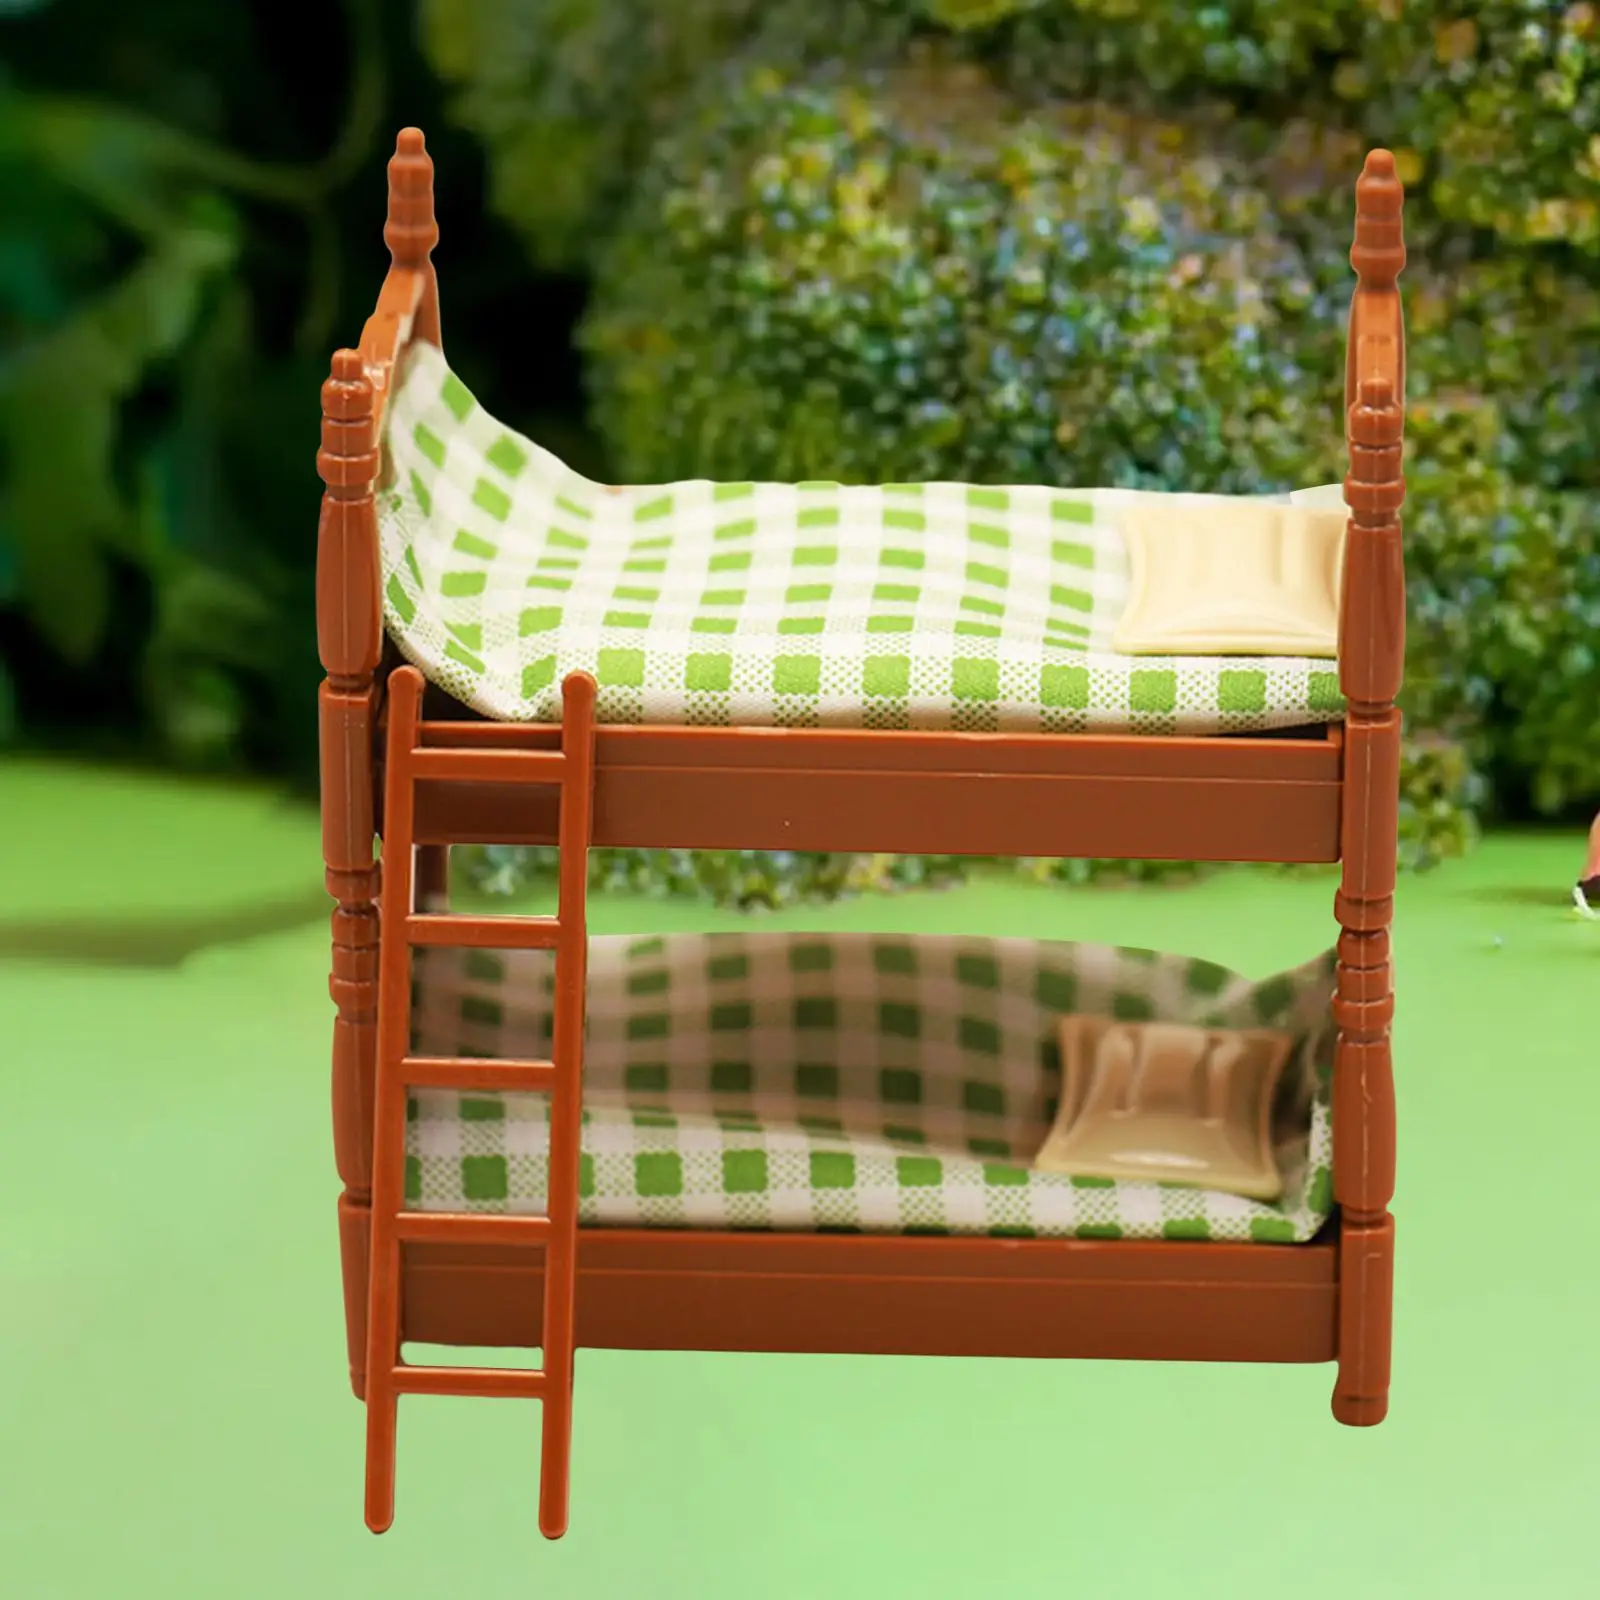 

Dollhouse Bunk Canopy Bed with A Ladder Cute Handmade Pretend Toys Role Play Dollhouse Furniture